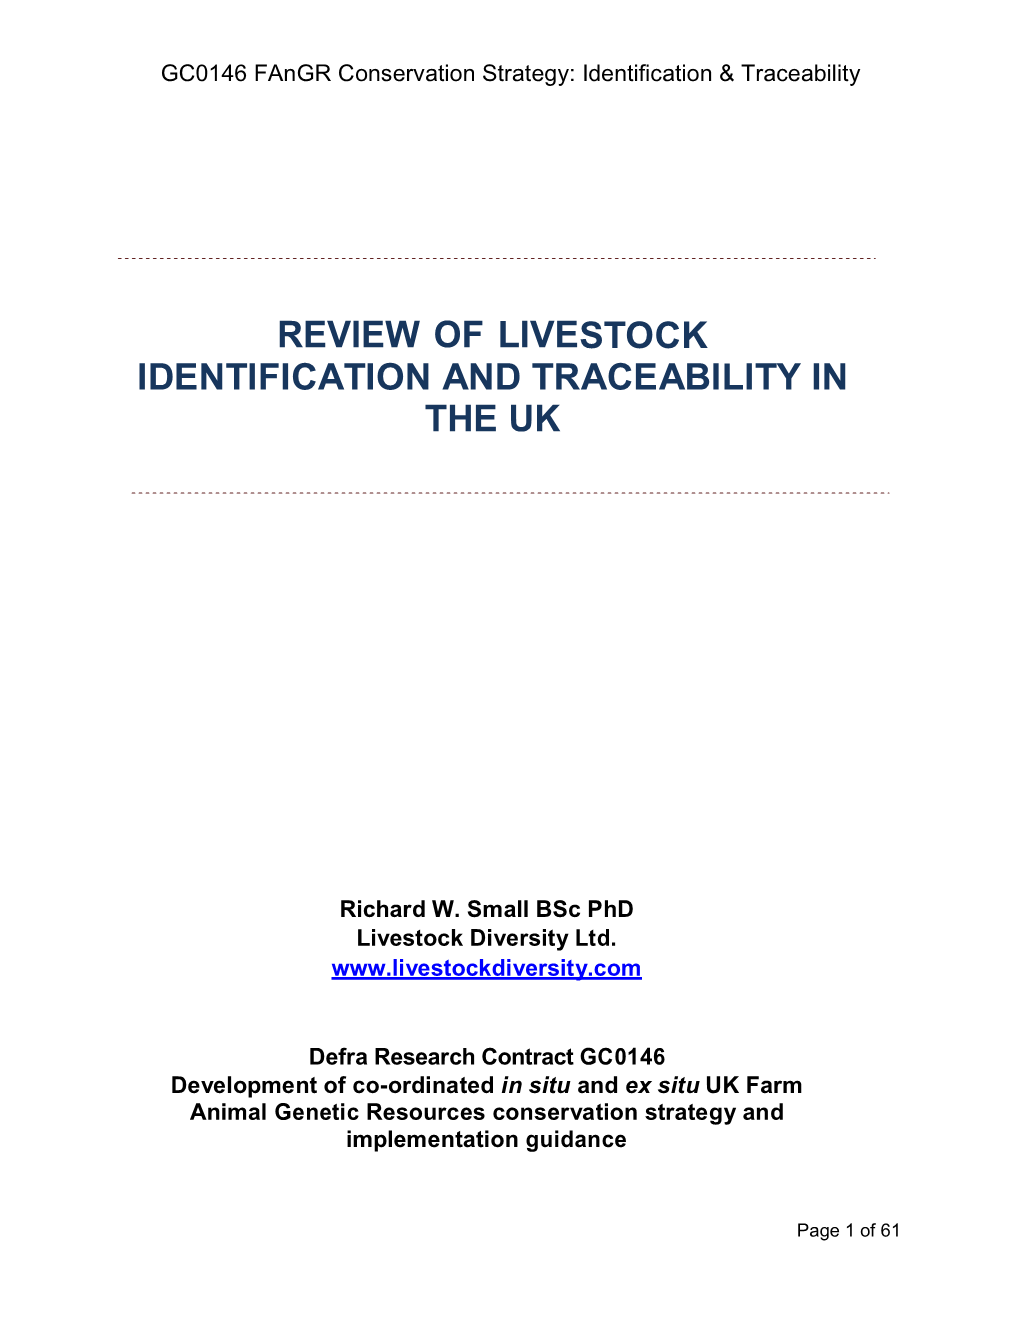 Identification and Traceability Final